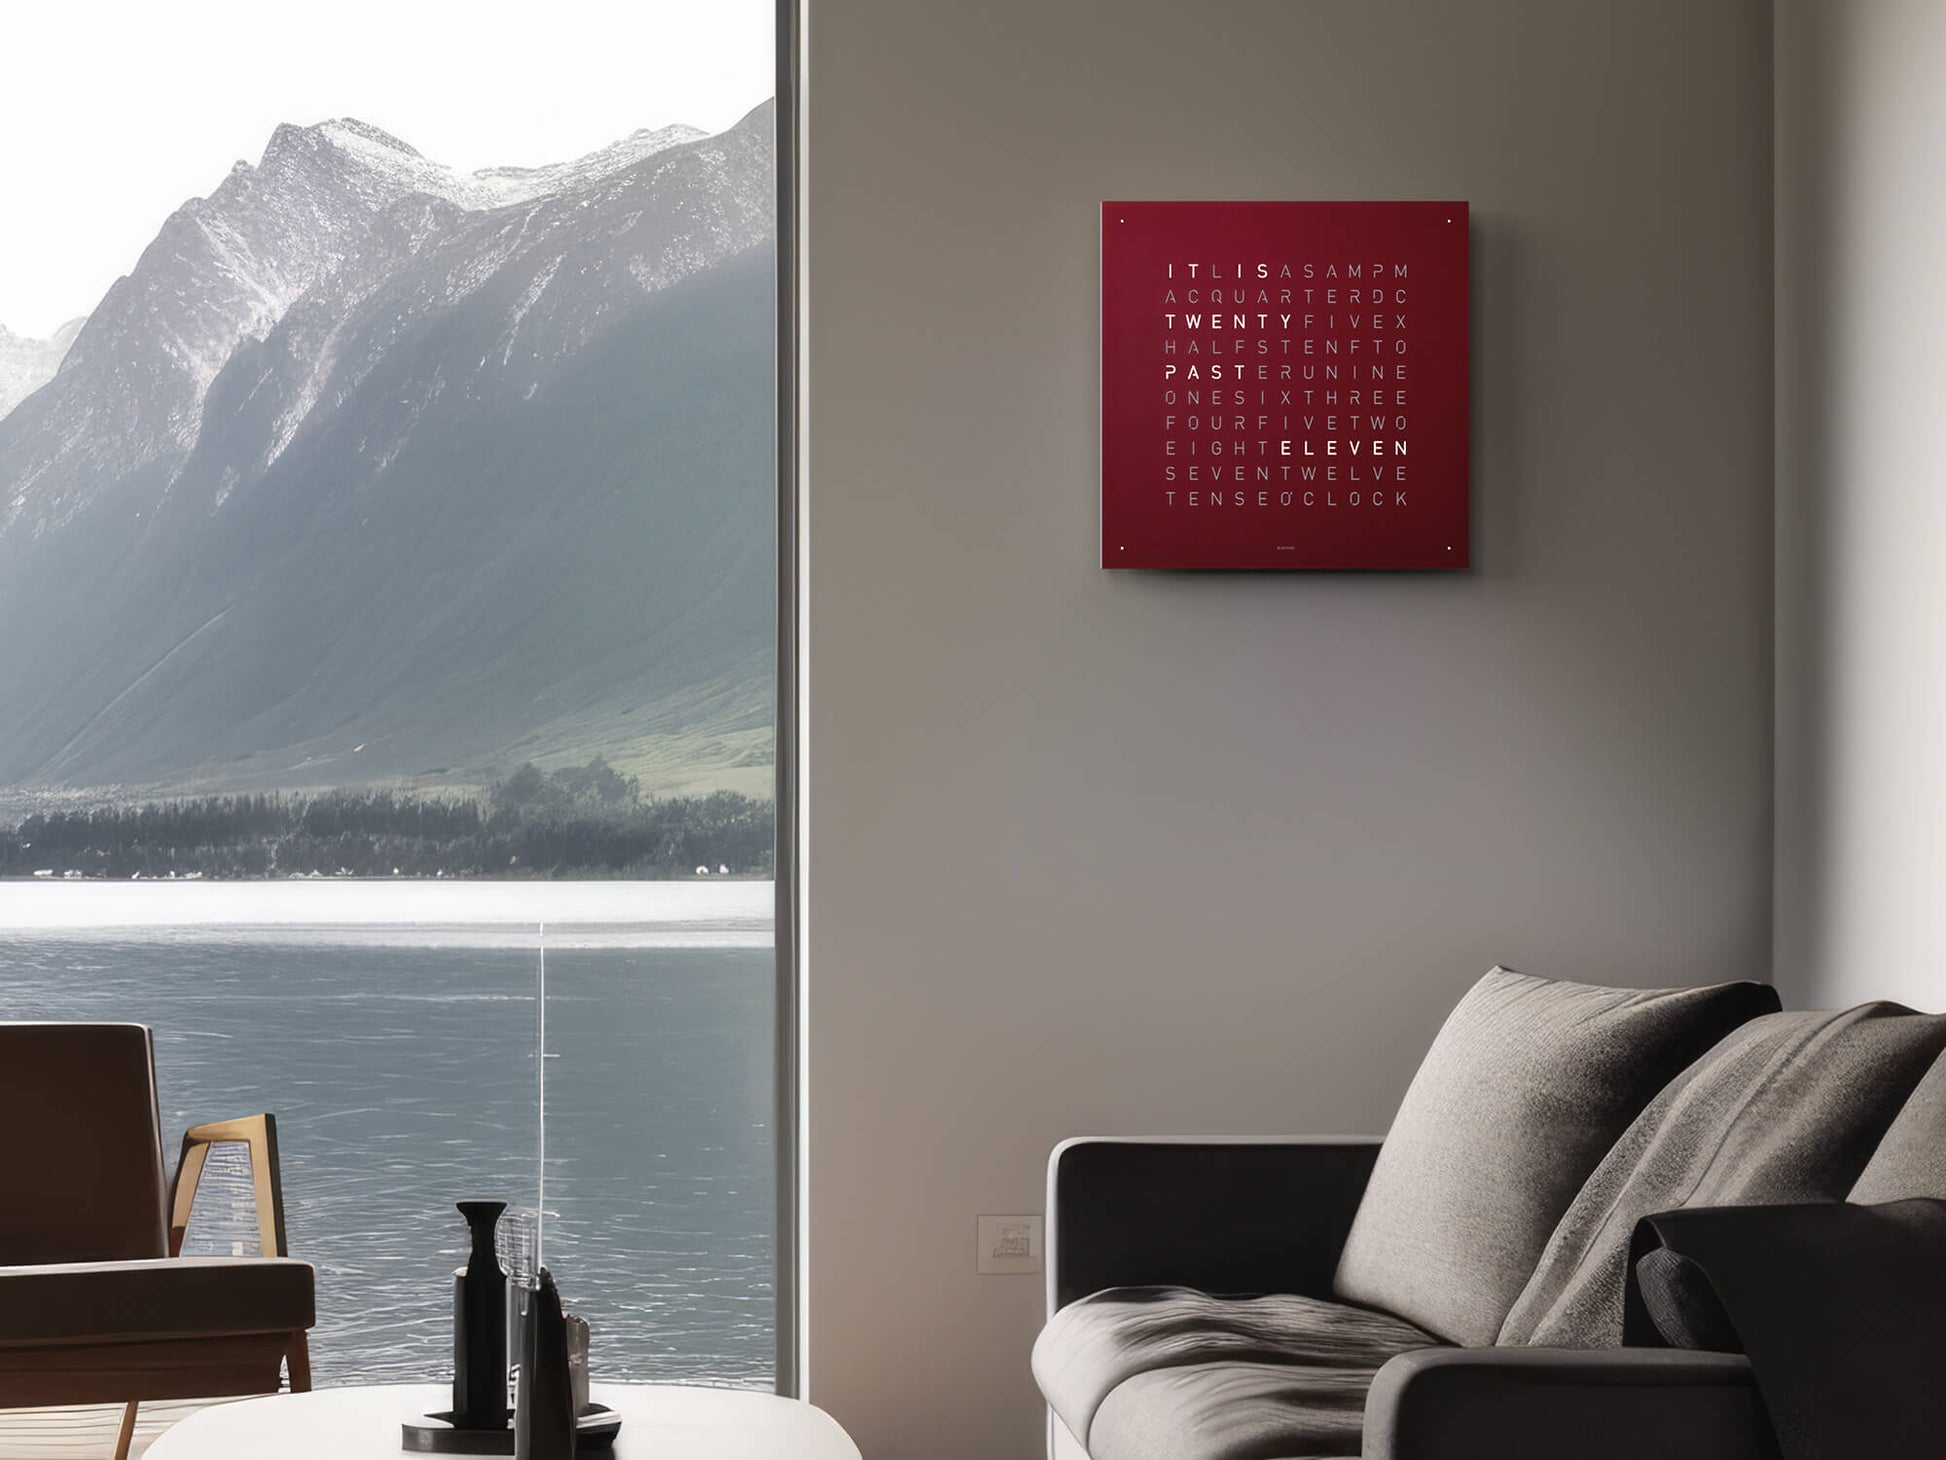 Qlocktwo Classic Wall-mounted clock red velvet finish with white body